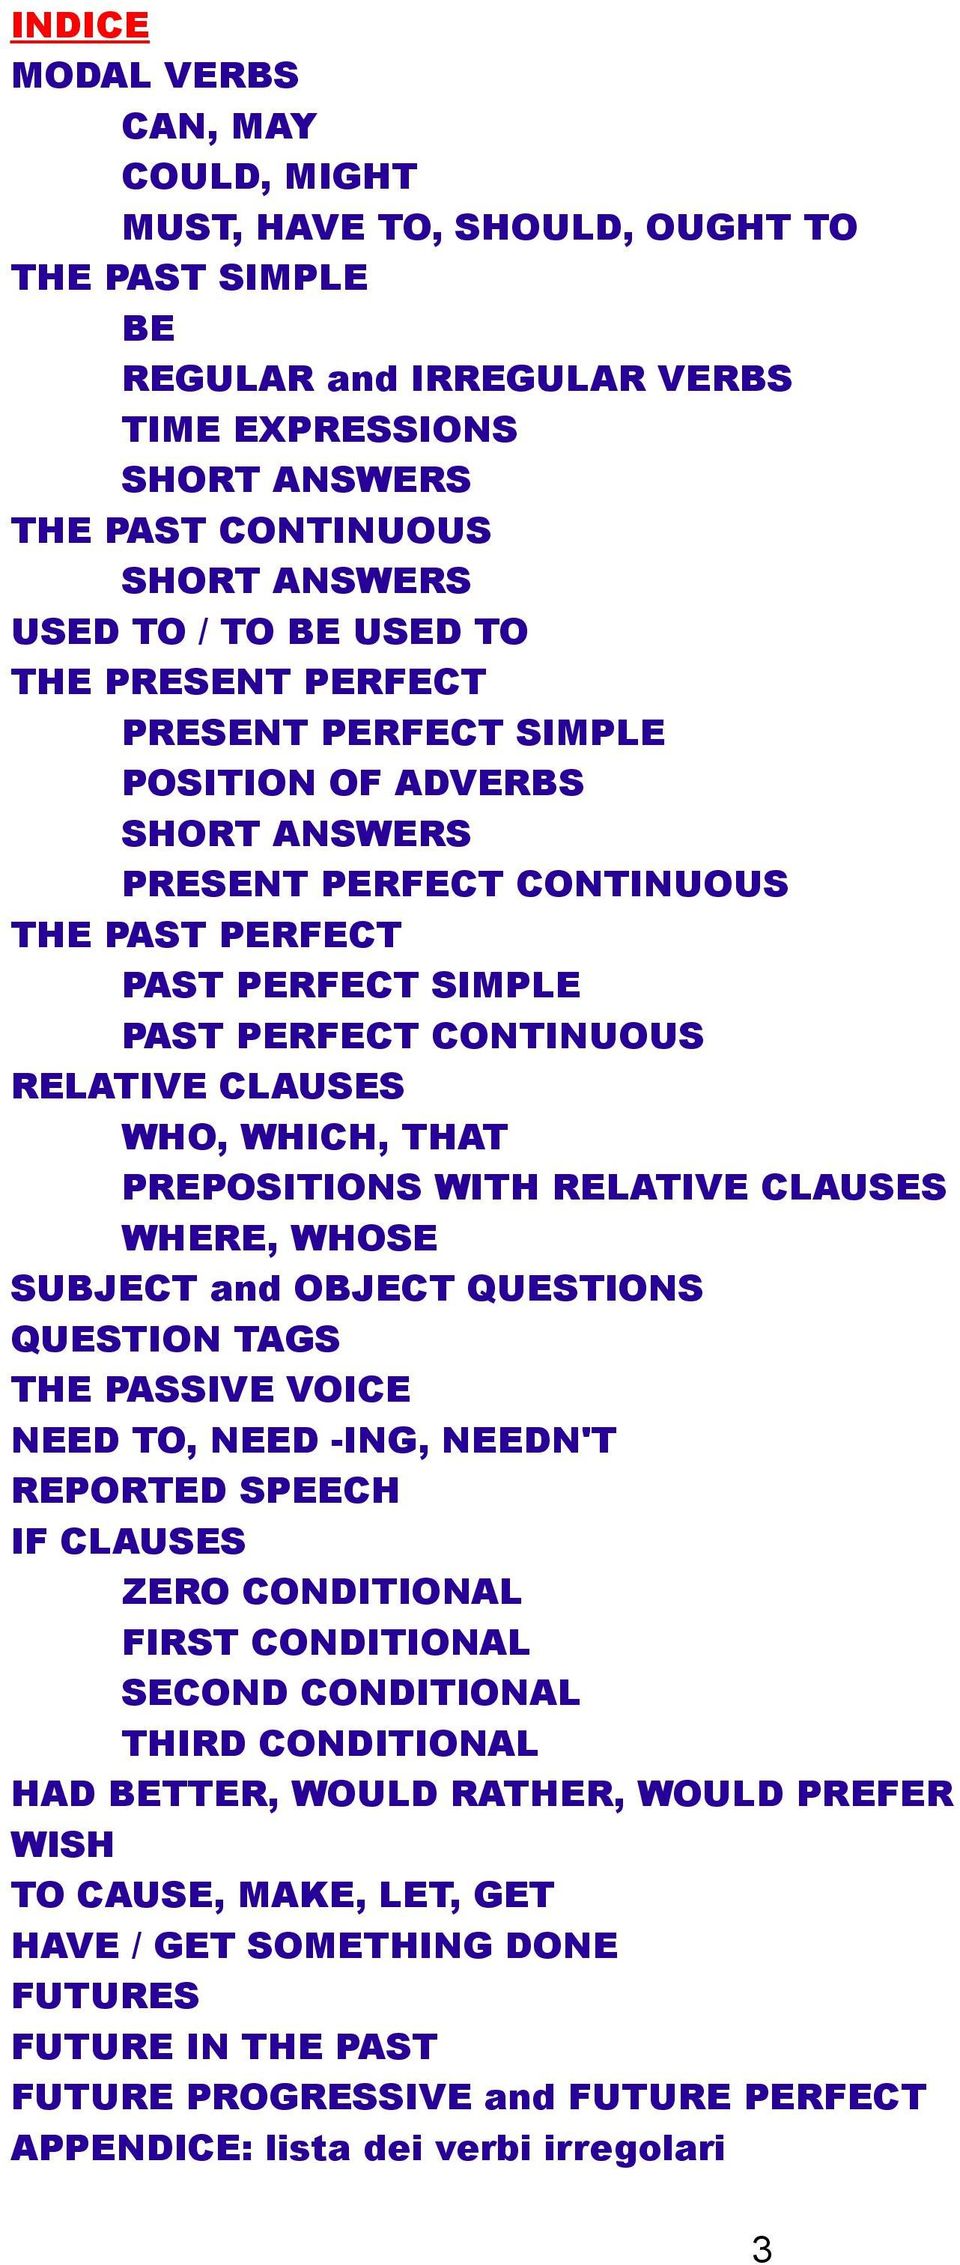 WHICH, THAT PREPOSITIONS WITH RELATIVE CLAUSES WHERE, WHOSE SUBJECT and OBJECT QUESTIONS QUESTION TAGS THE PASSIVE VOICE NEED TO, NEED -ING, NEEDN'T REPORTED SPEECH IF CLAUSES ZERO CONDITIONAL FIRST